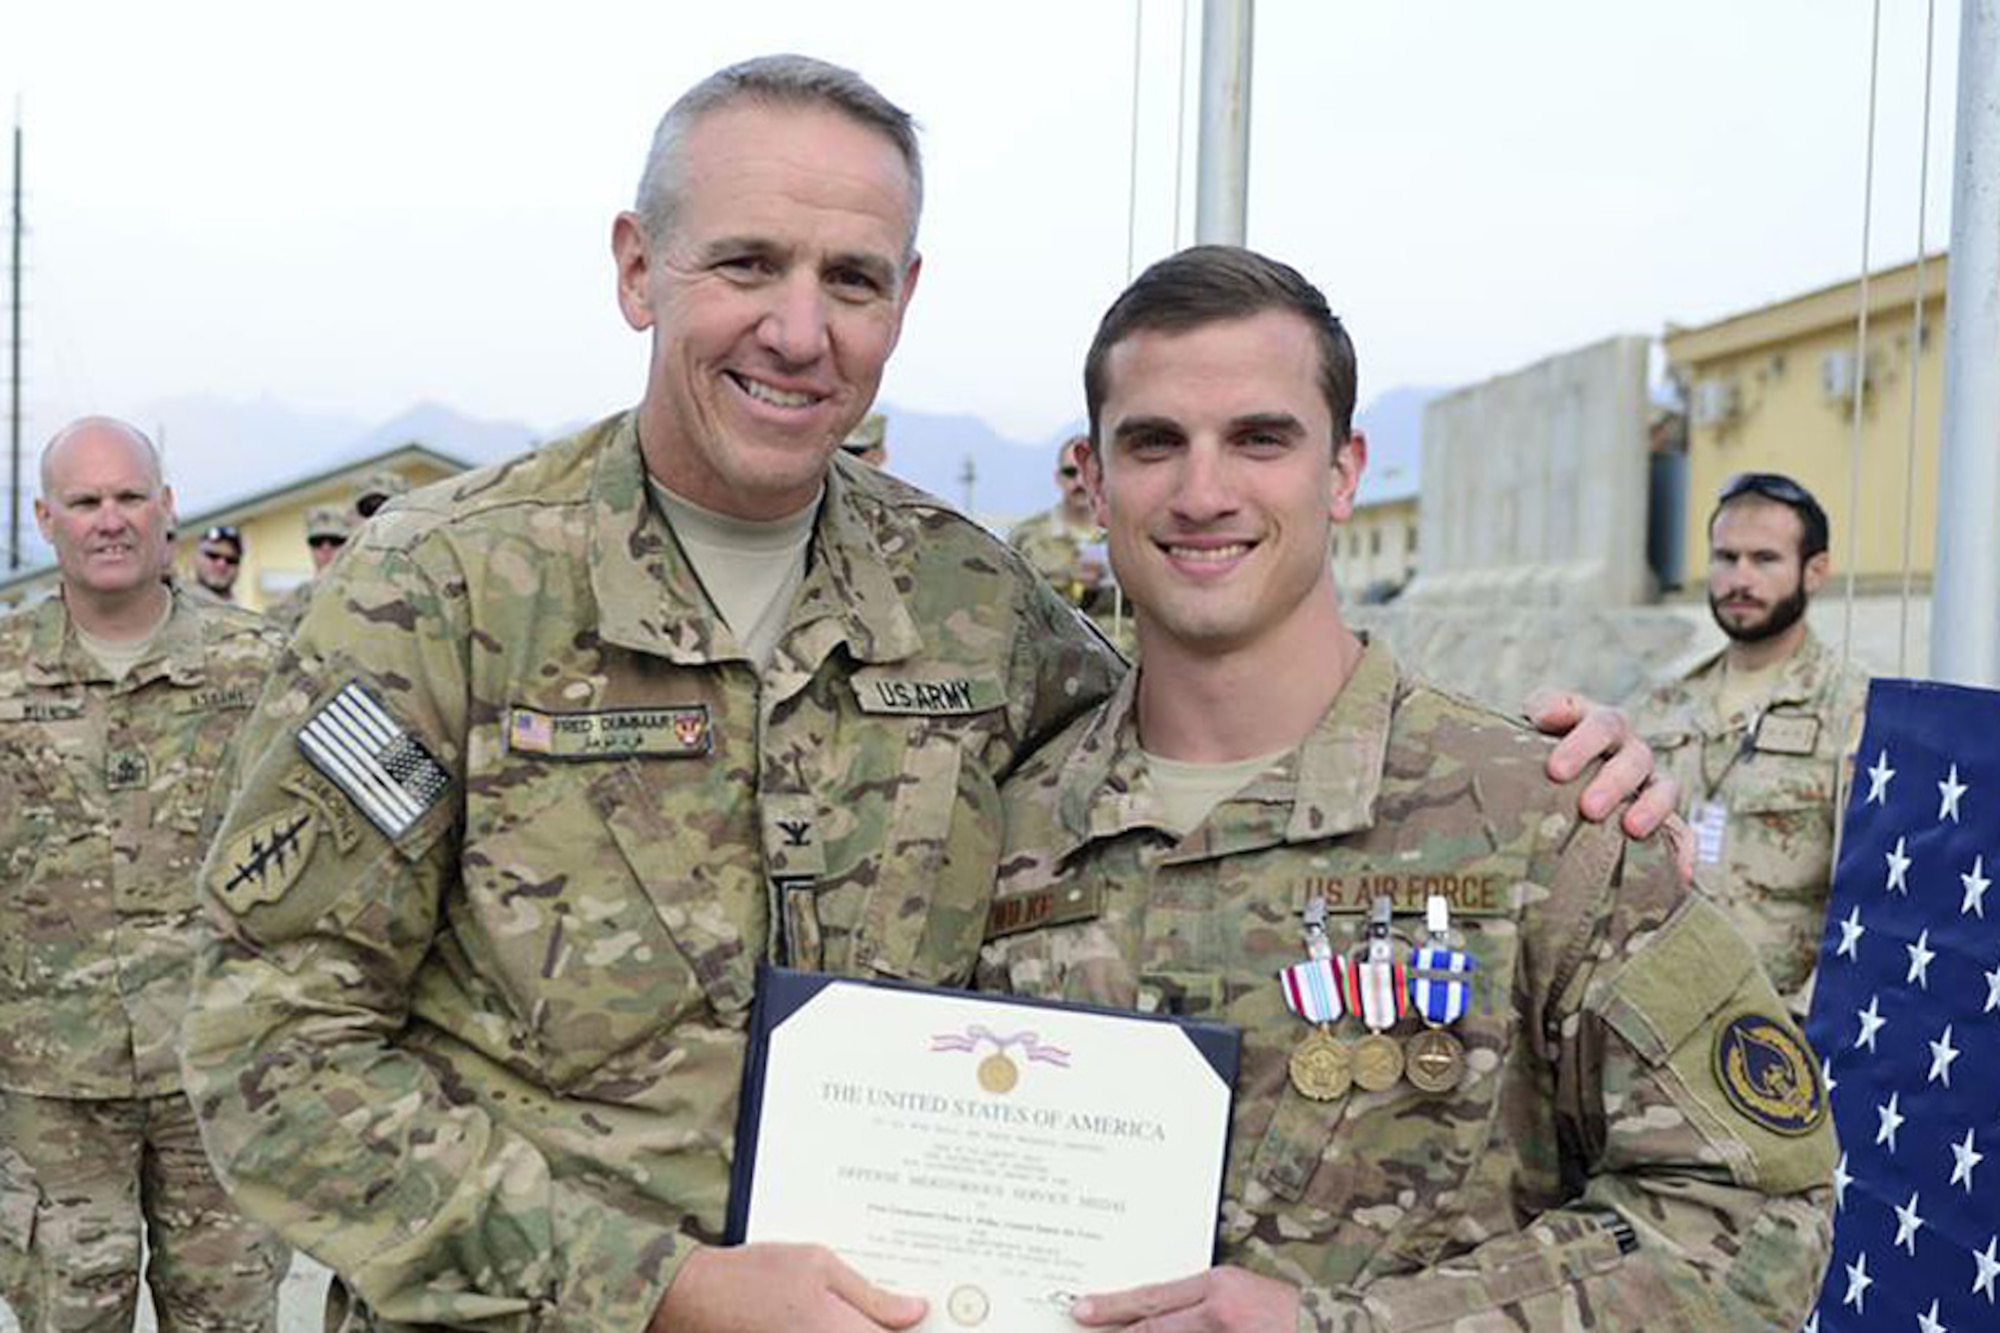 U.S. Army Col. Frederick Dummar, Afghan National Army Special Operations Command - Special Operations Advisory Group commander, presents 1st Lt. Chase S. Wilke, ANASOC-SOAG contracting advisor, and Battle Management Directorate’s Aerospace Management Systems Branch contracting officer, with the Defense Meritorious Service Medal, Afghanistan Campaign Medal, and Non-Article 5 NATO Medal for International Security Assistance Force last year near the end of his deployment to Afghanistan. Wilke and other contracting officers at Hanscom AFB have provided a critical capability to the warfighting mission since Operations Enduring and Iraqi Freedom began more than a decade ago. (Courtesy photo)